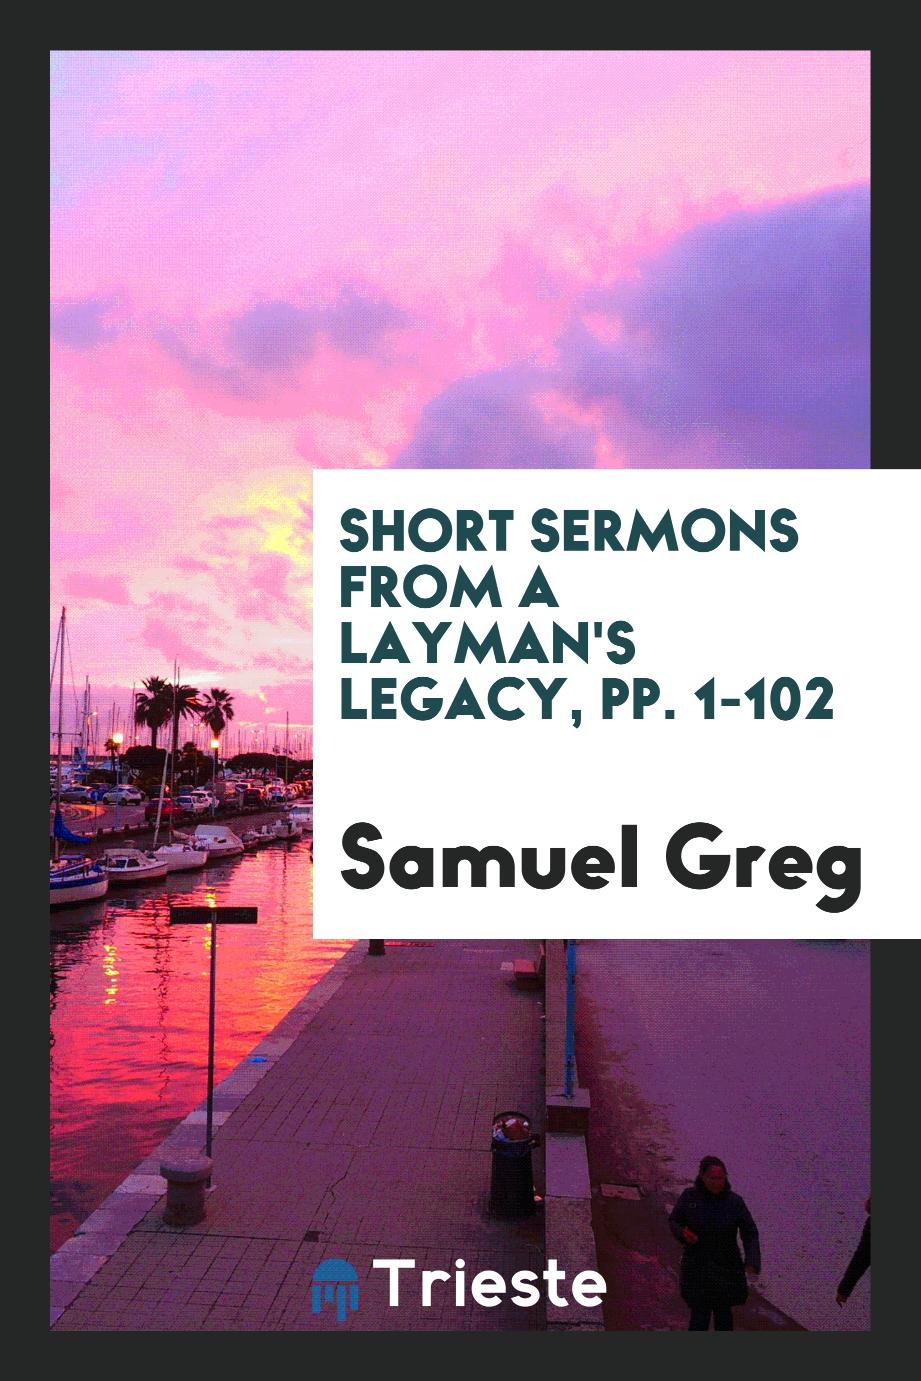 Short Sermons from A Layman's Legacy, pp. 1-102